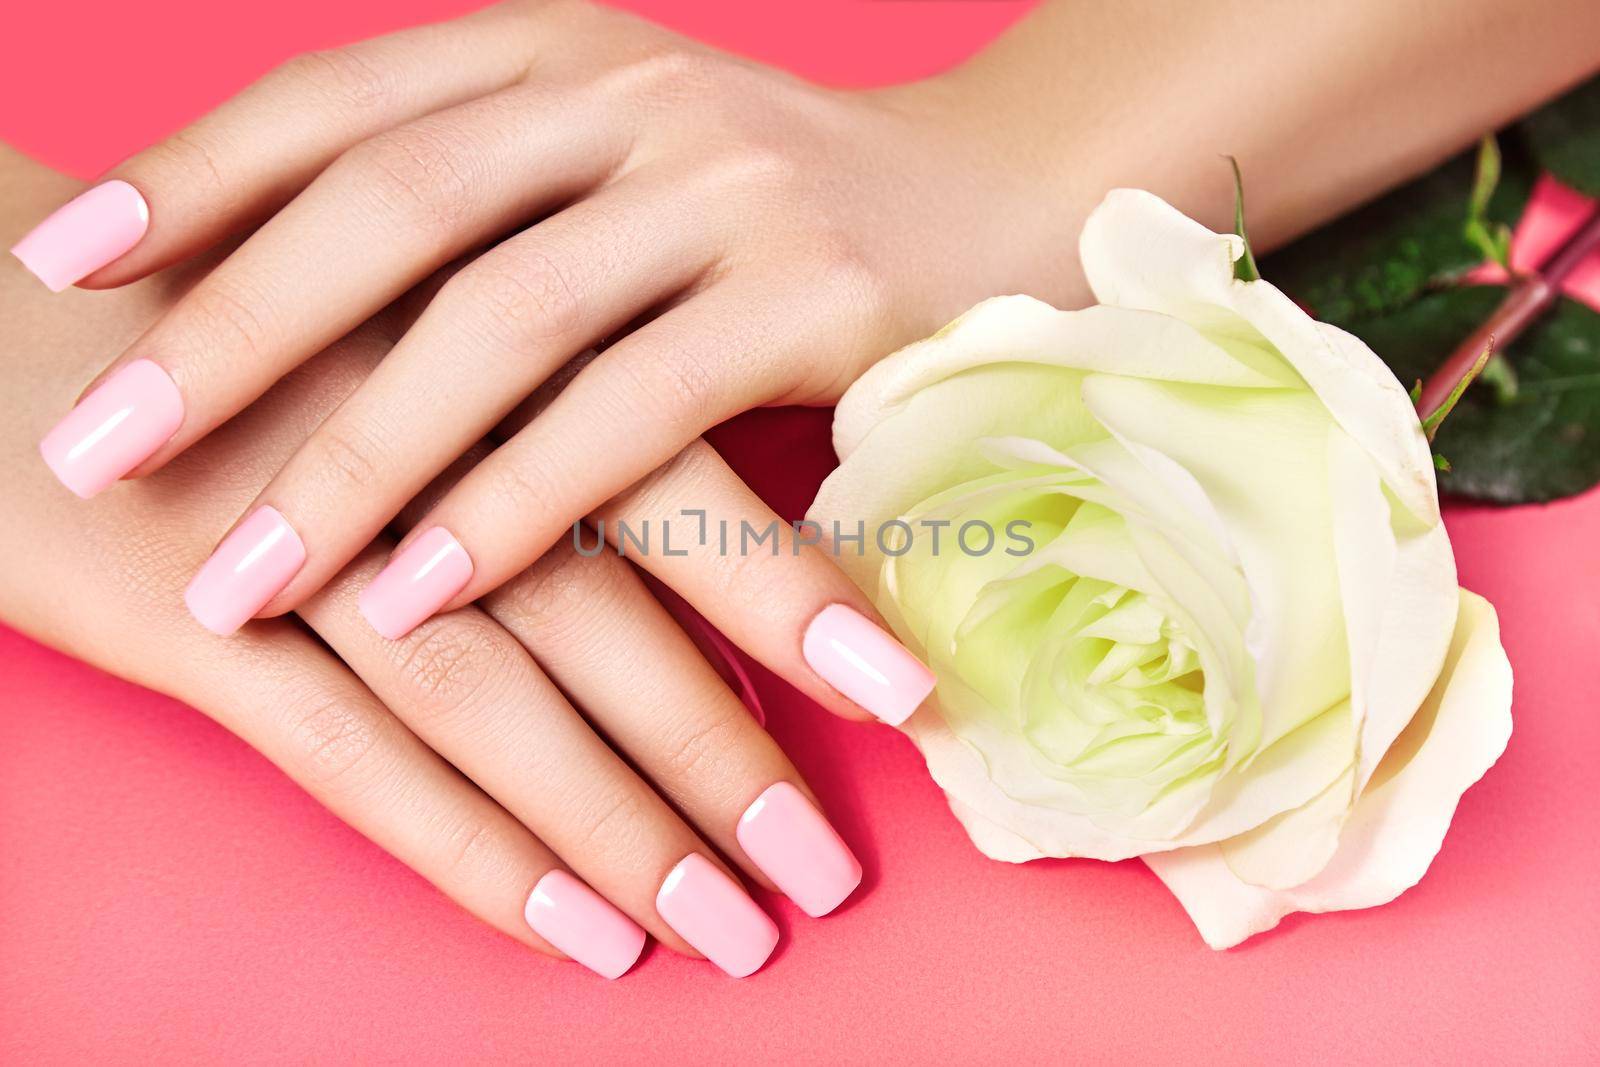 Manicured nails with pink nail polish. Manicure with nailpolish. Fashion art manicure with shiny gel lacquer. Nails salon